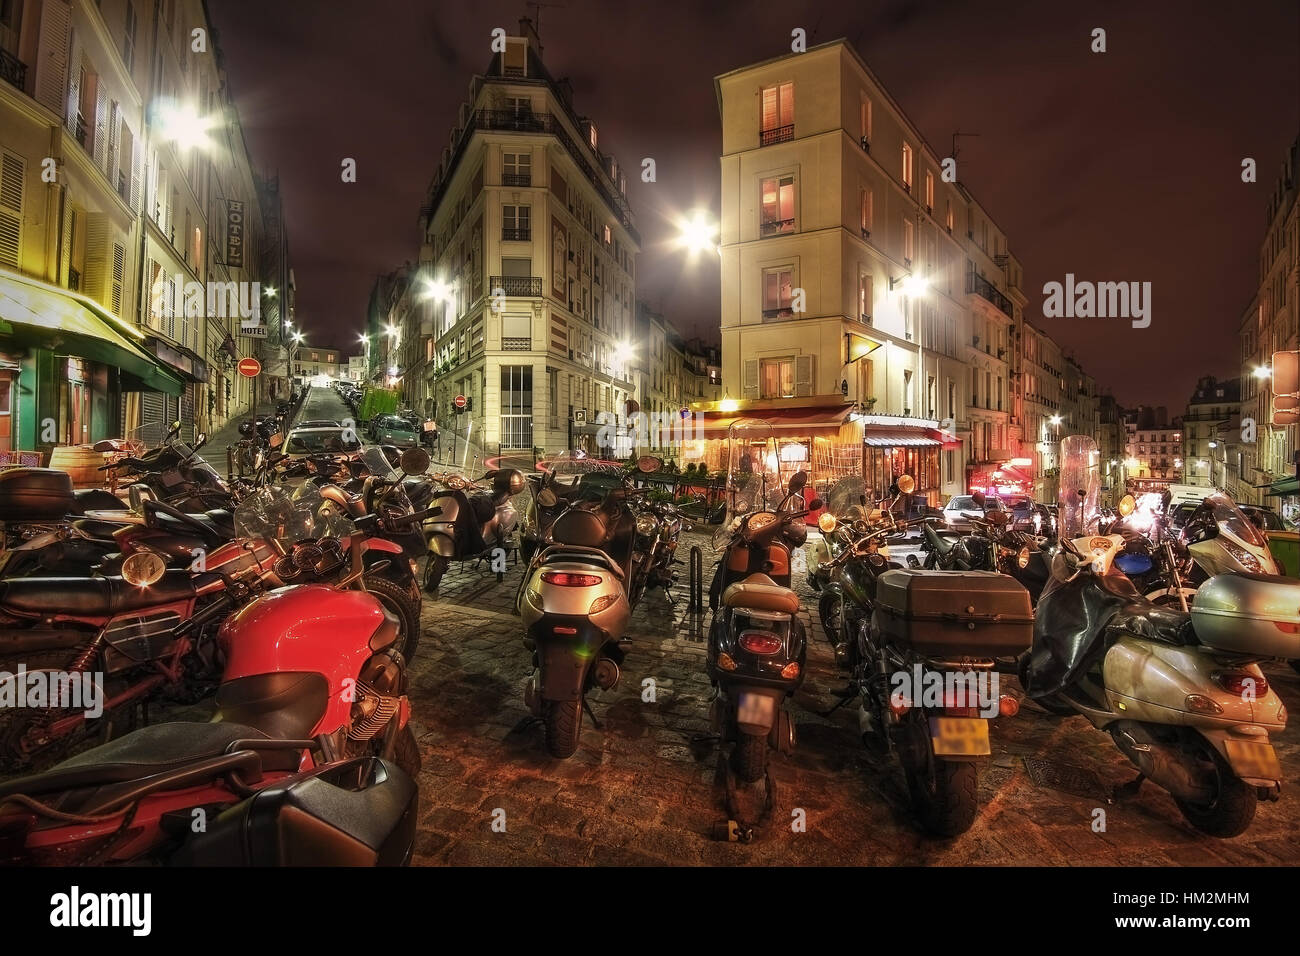 Paris. France. Motorcycles parked on the crossroads rue Maurice Utrillo, rue Paul Albert, rue Feutrier and rue Muller. Stock Photo